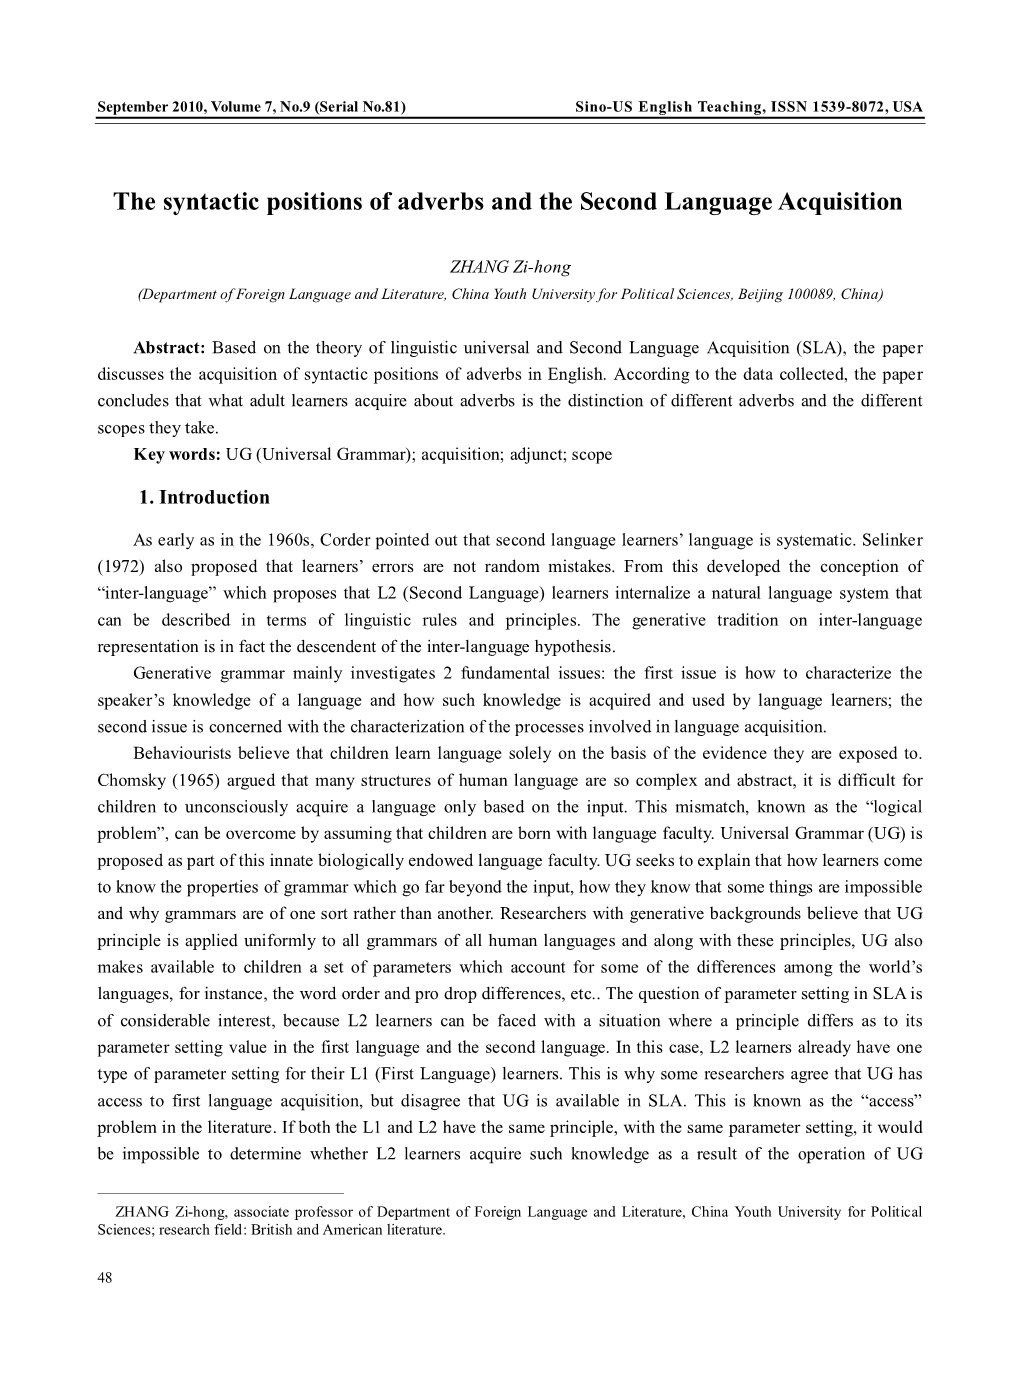 The Syntactic Positions of Adverbs and the Second Language Acquisition